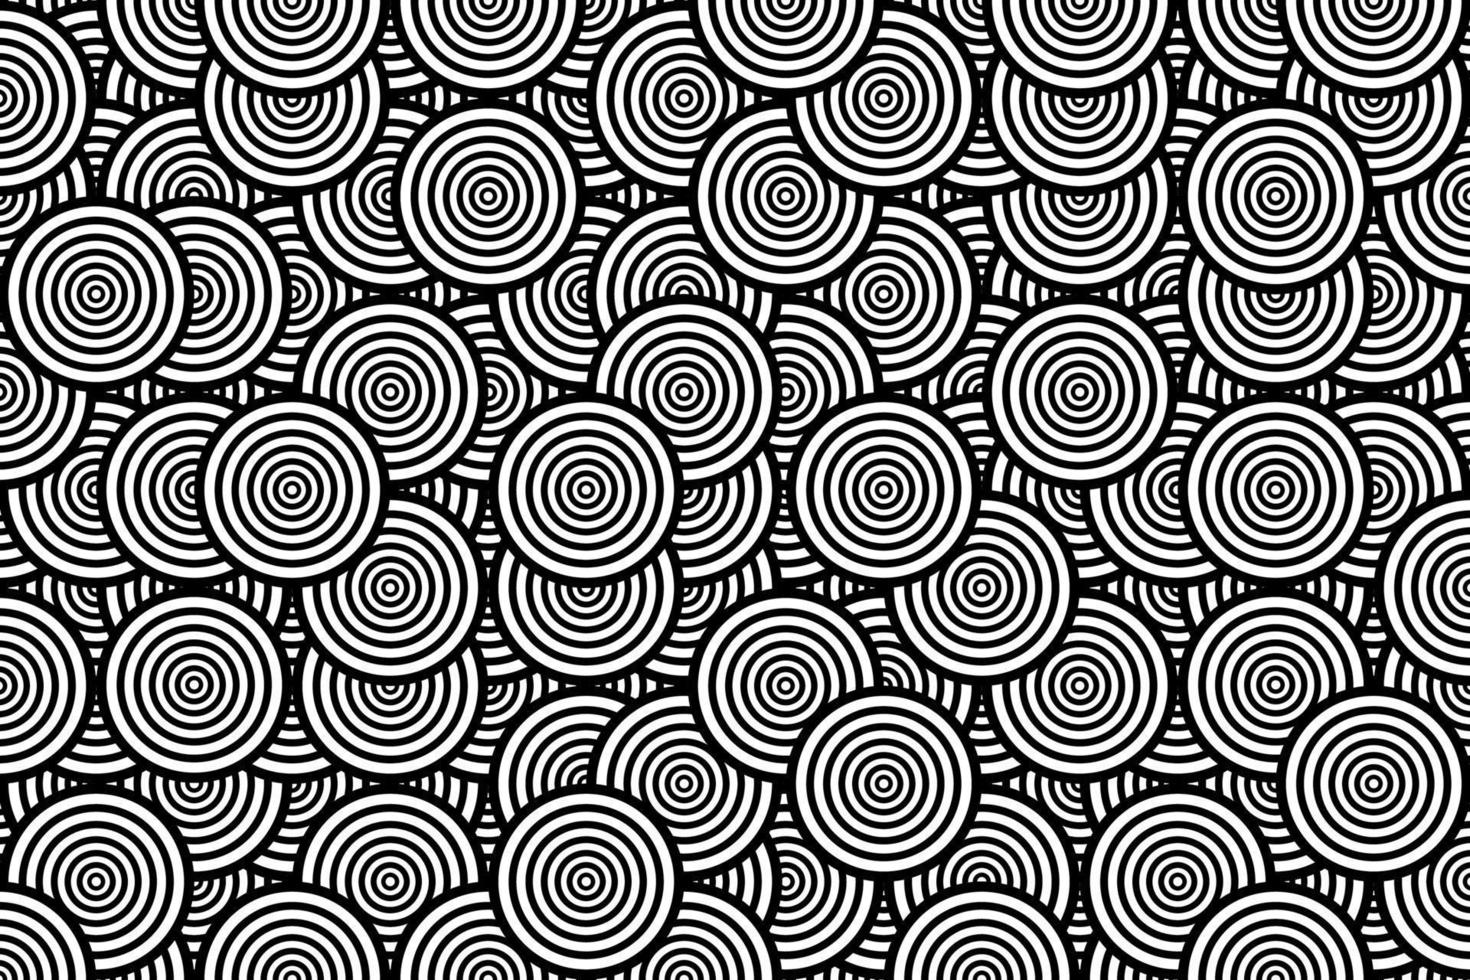 Seamless pattern geometric abstract design background vector